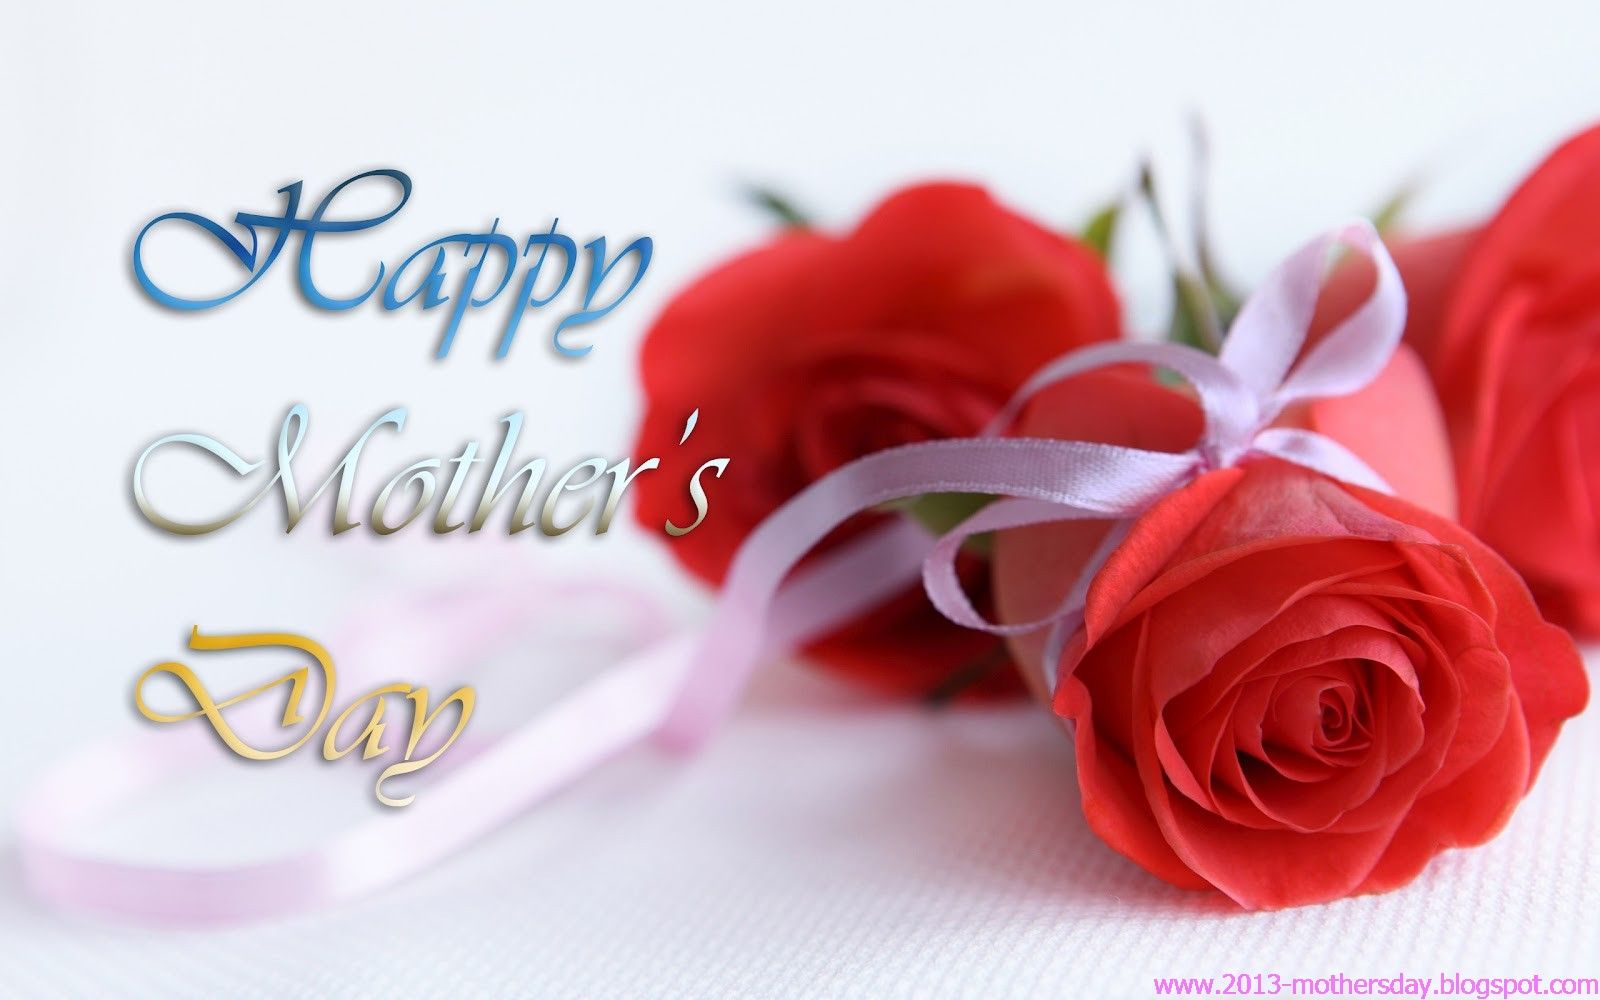 Christian Mother's Day Wallpapers Wallpaper Cave